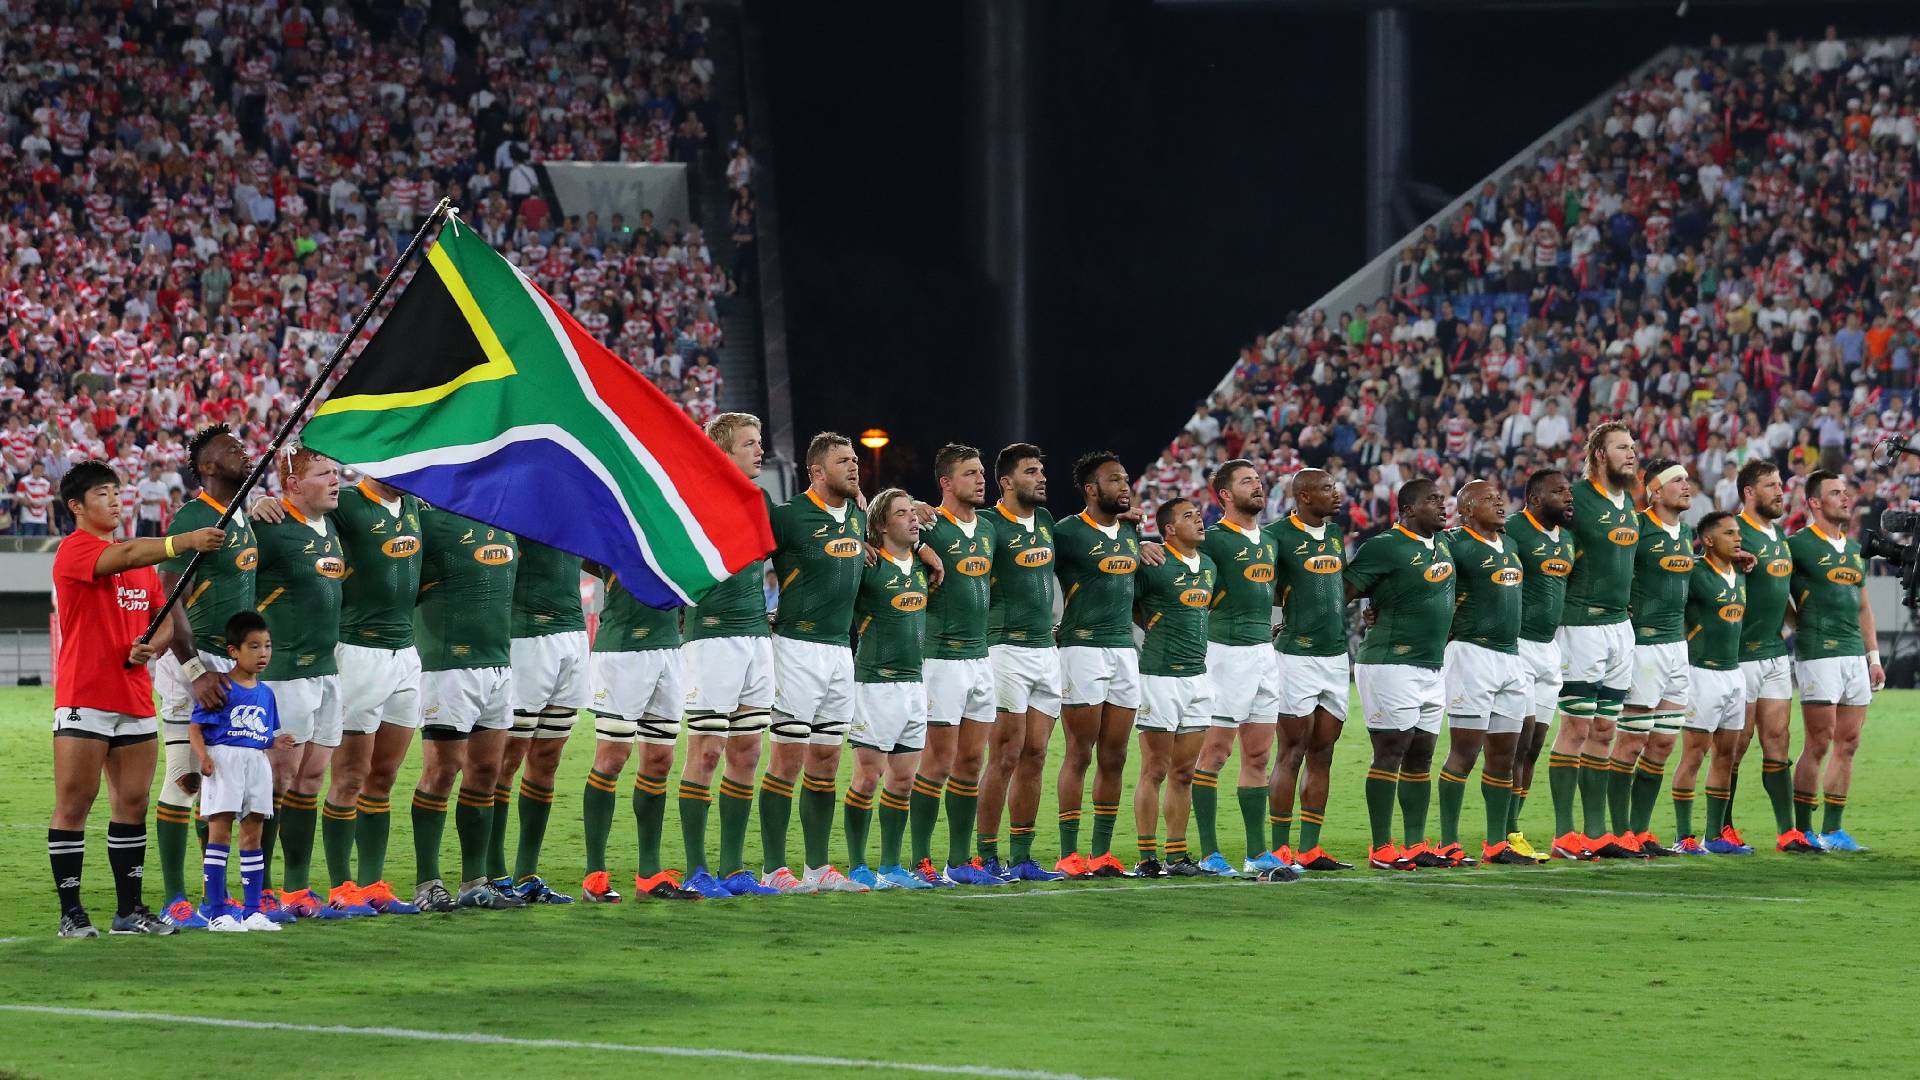 Springboks name strong side to face All Blacks in opening World